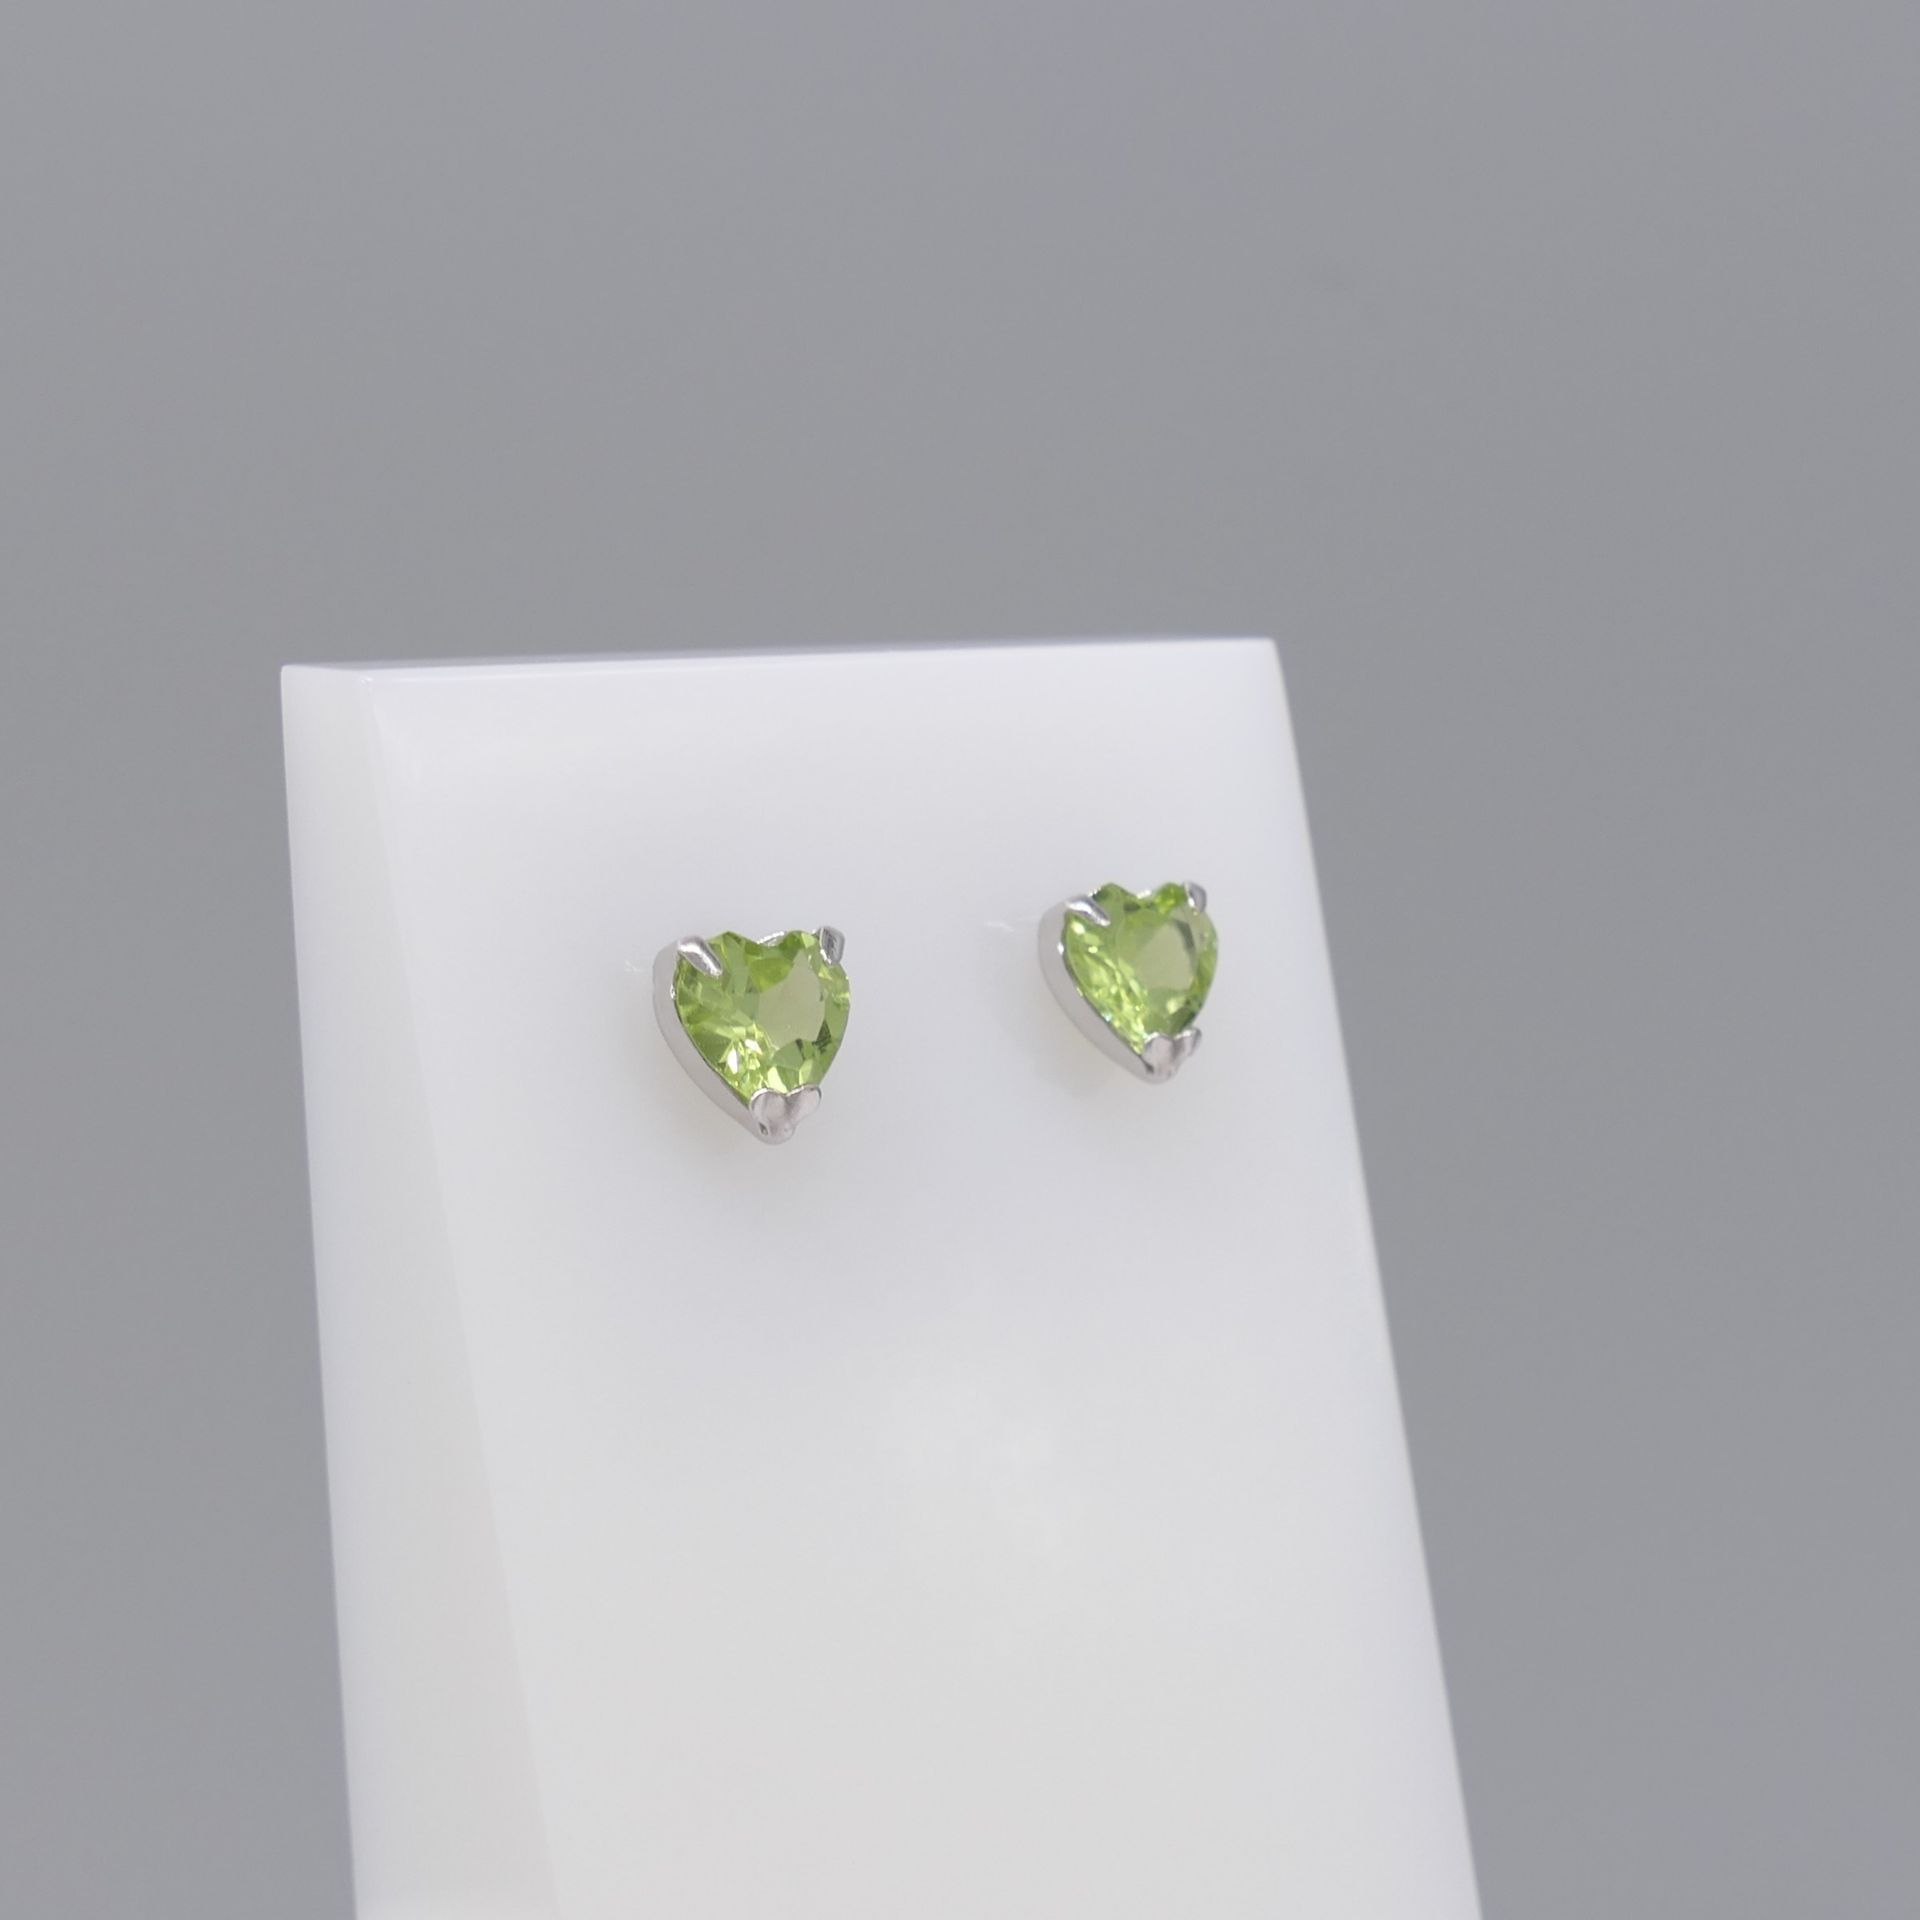 Heart-shaped Ear Studs Set With Peridot Gemstones, In 18ct White Gold, Boxed - Image 2 of 5